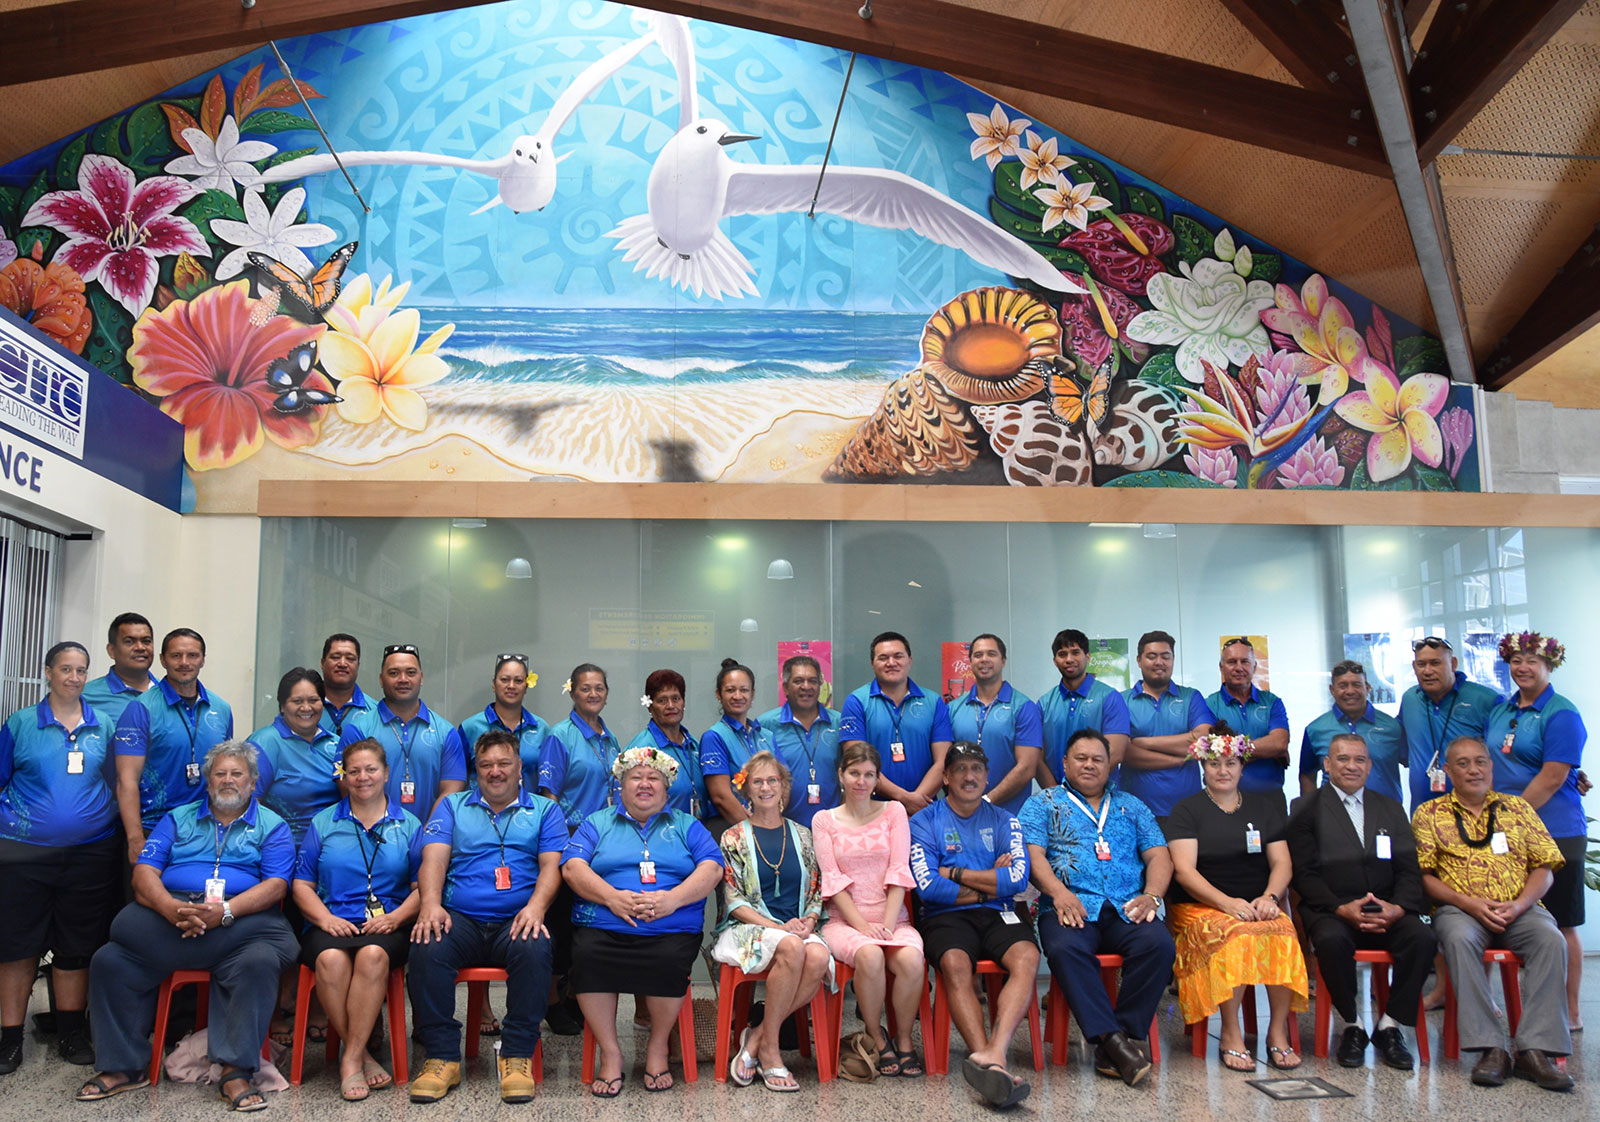 ‘Journey – To tatou Kaveinga’ mural captures beauty and vibrancy of the Cook Islands